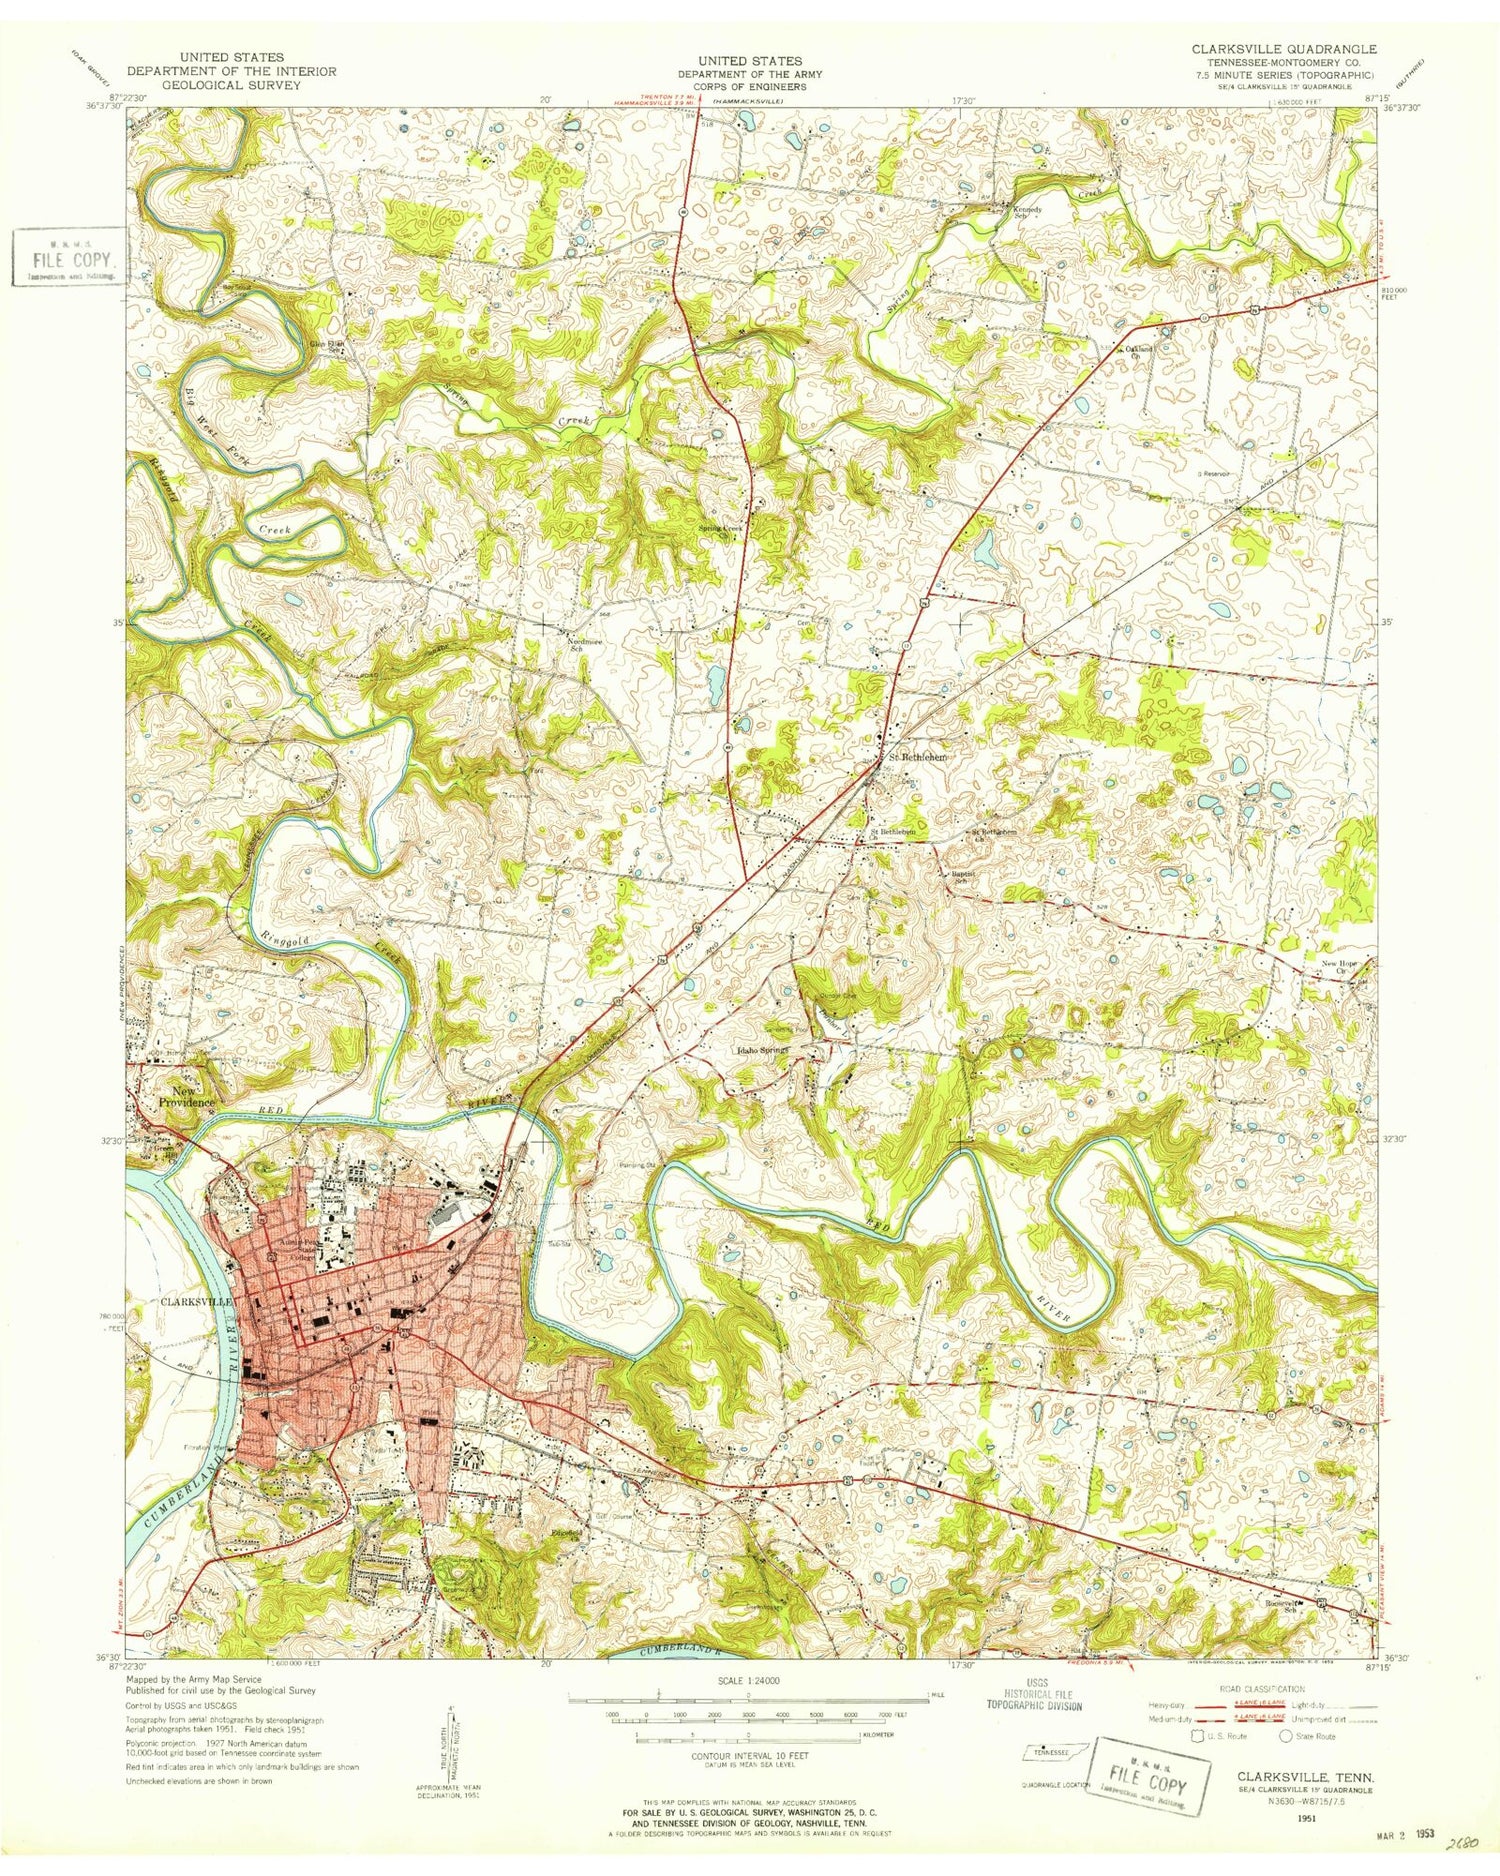 Classic USGS Clarksville Tennessee 7.5'x7.5' Topo Map Image